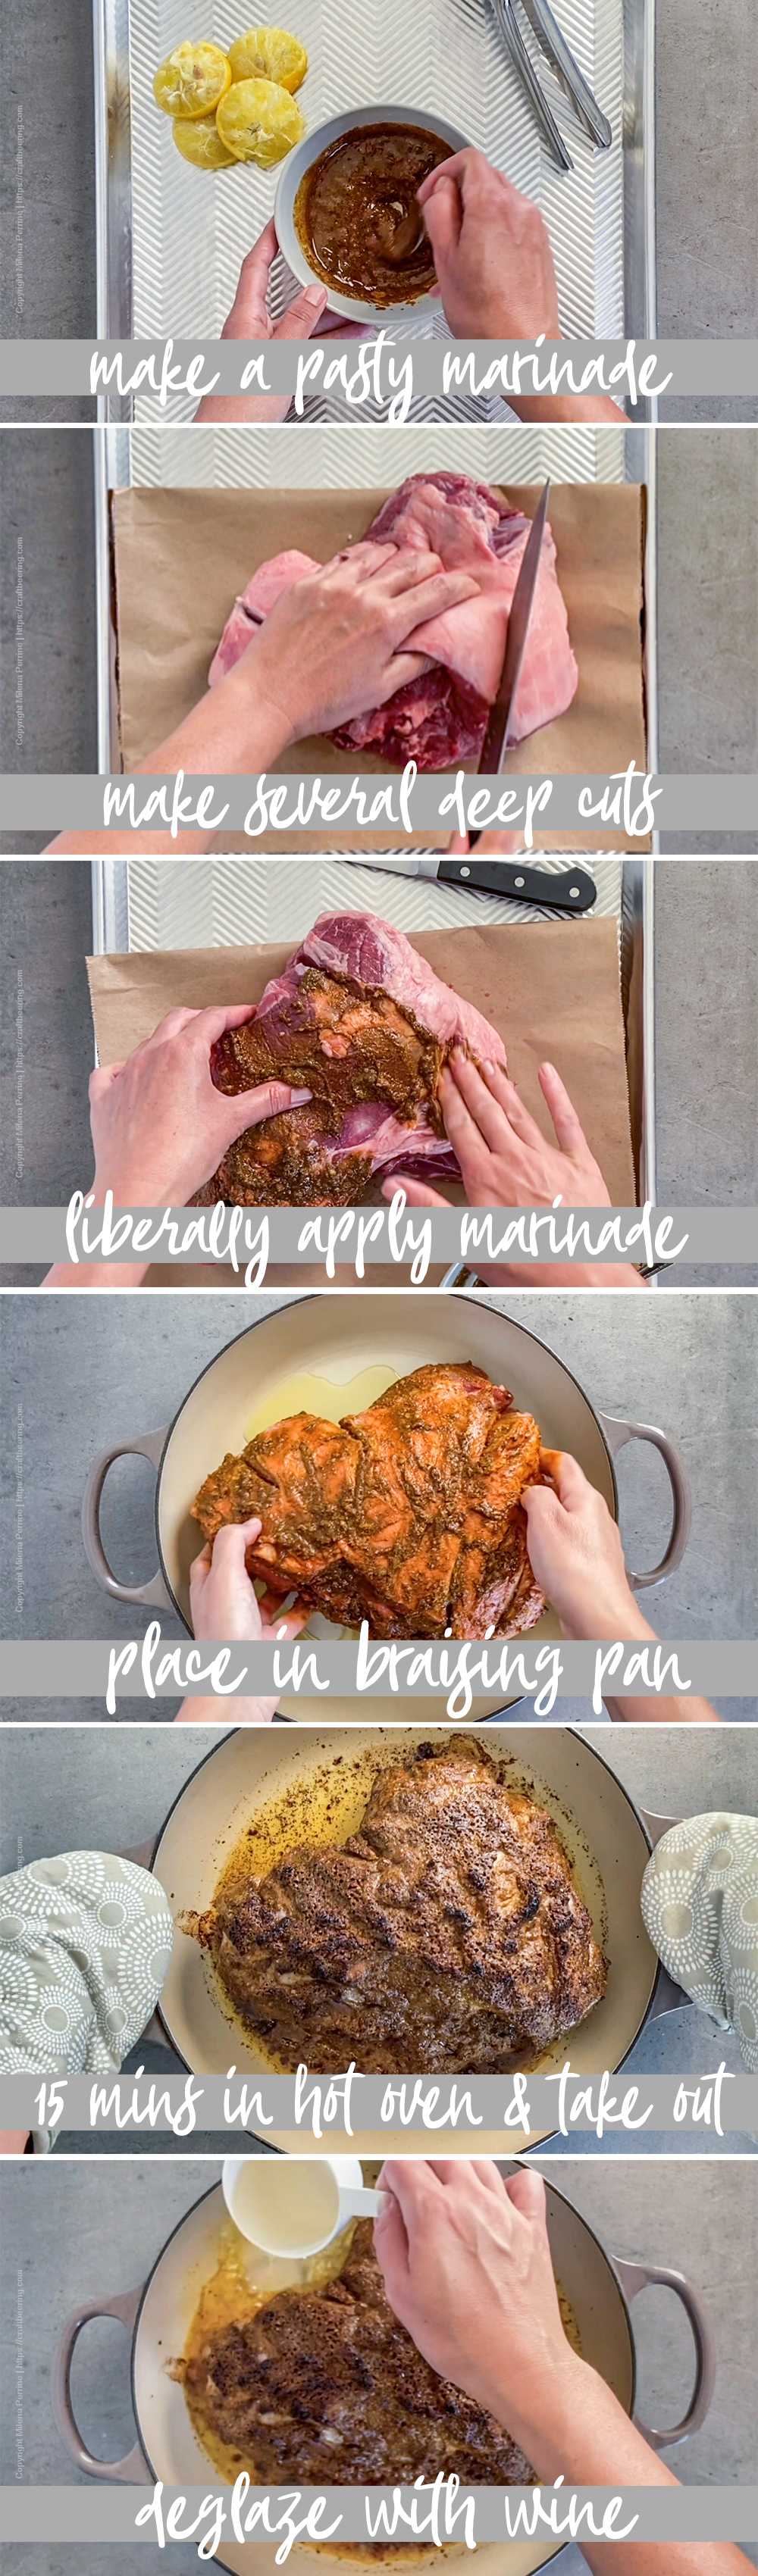 How to prepare a boneless leg of lamb for braising - step by step pictures. 